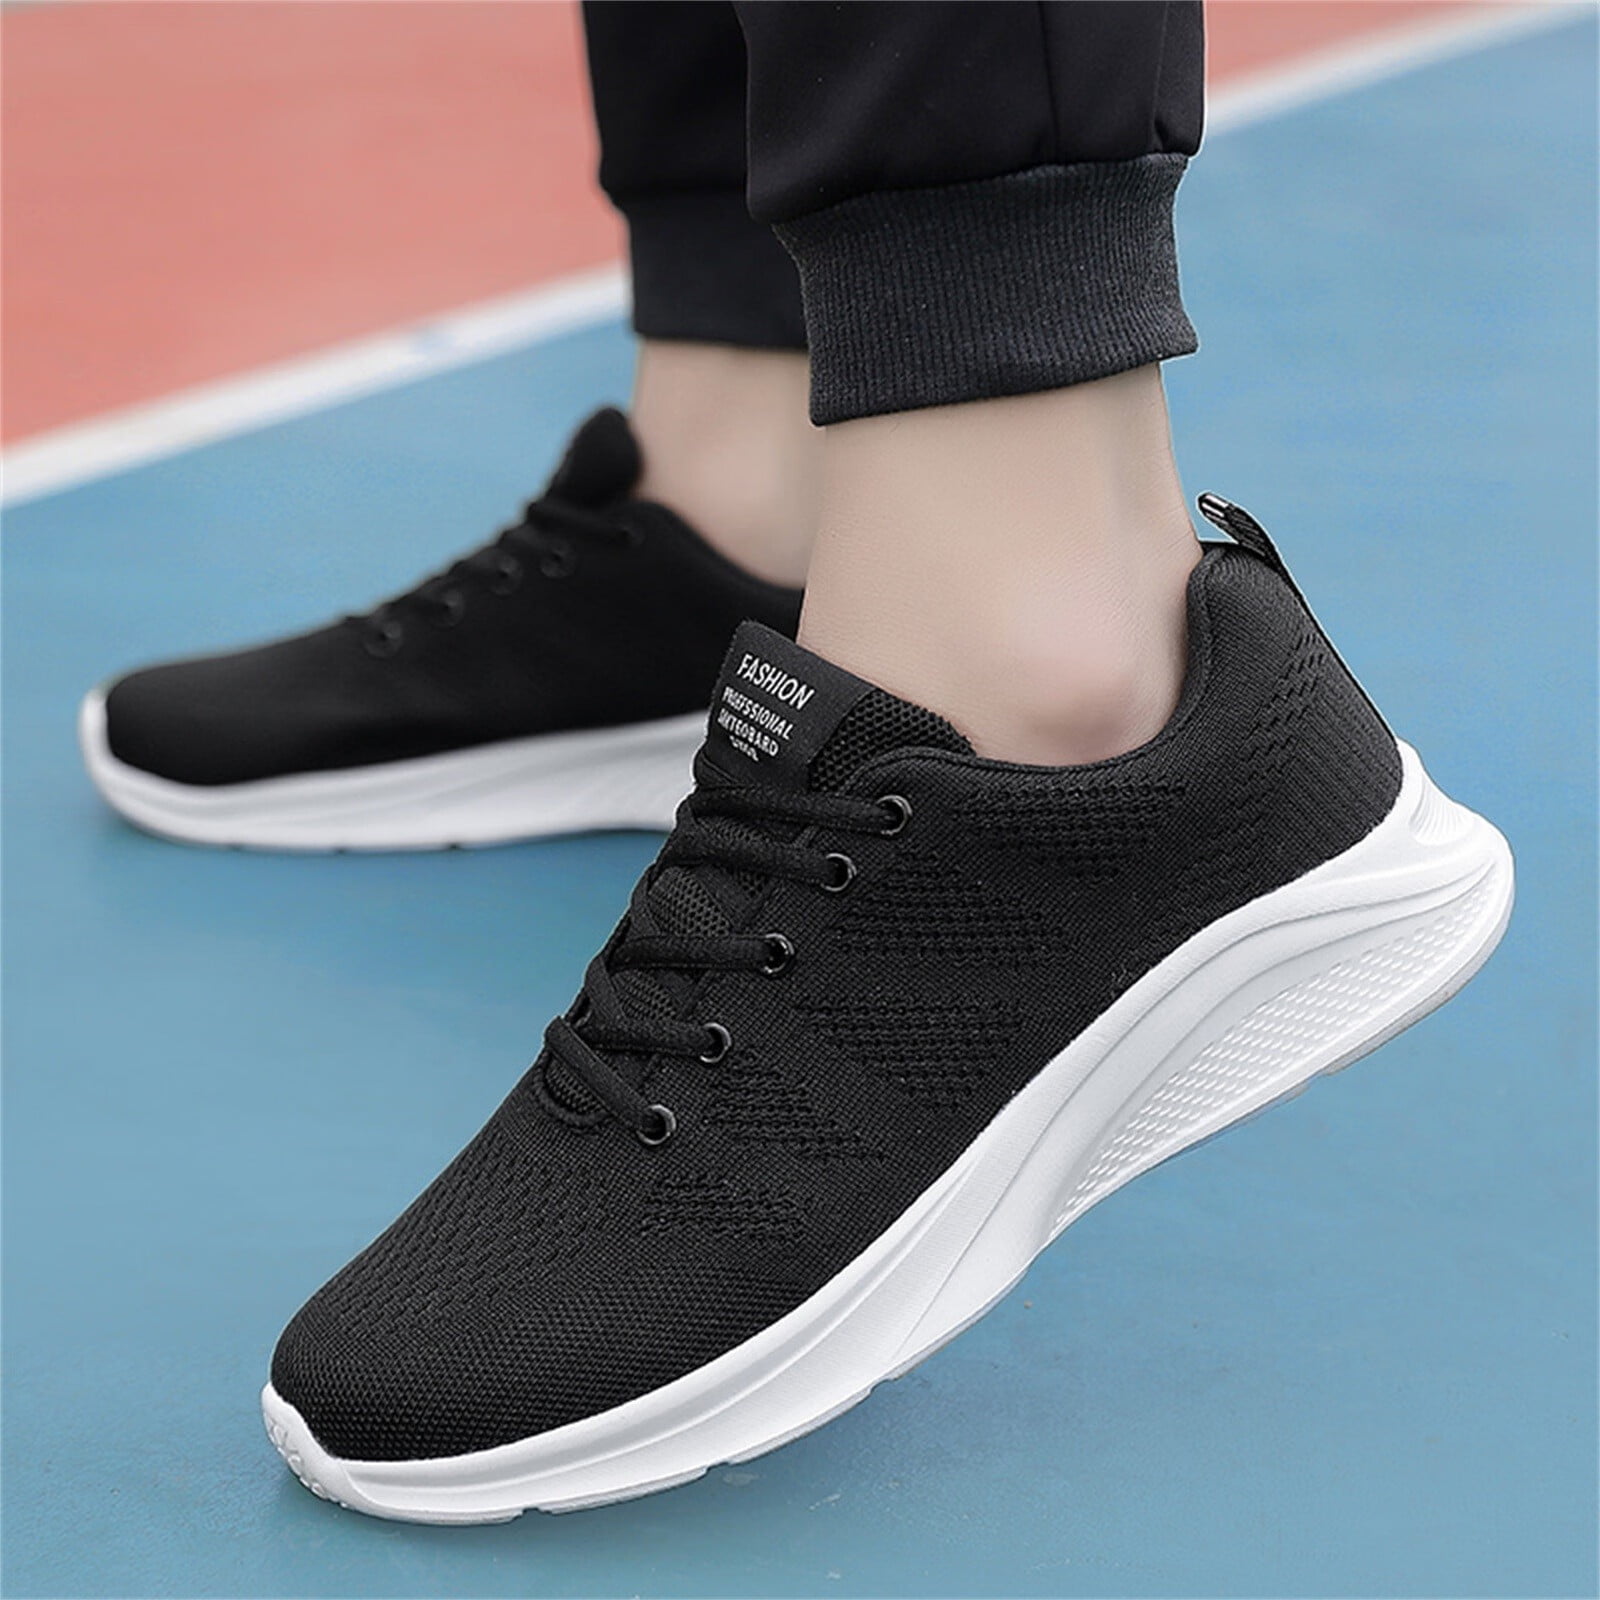 Sneakers for Men Fashion Summer Men Sneakers Mesh Breathable Comfort Flat  Lace Up Casual Mens Sneakers Mesh Black 45 